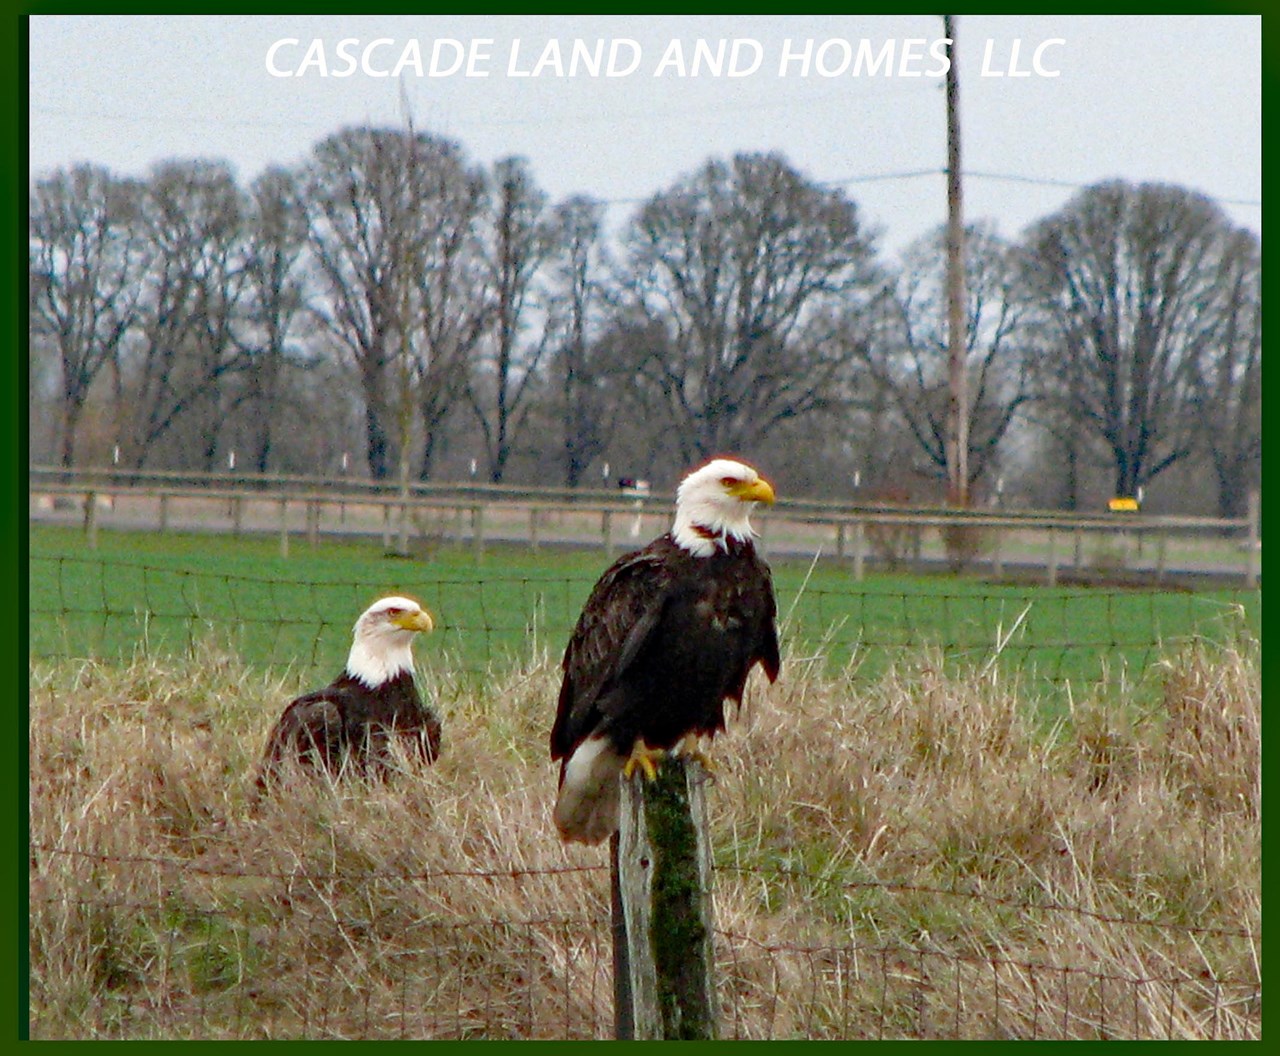 this area  is on the pacific flyway where more than 400 species of migratory birds pass through, including bald eagles, sandhill cranes, songbirds, and pelicans! in the winter months of november through february, hundreds of bald eagles winter over here. it is the largest wintering congregation of bald eagles in the lower 48 states.